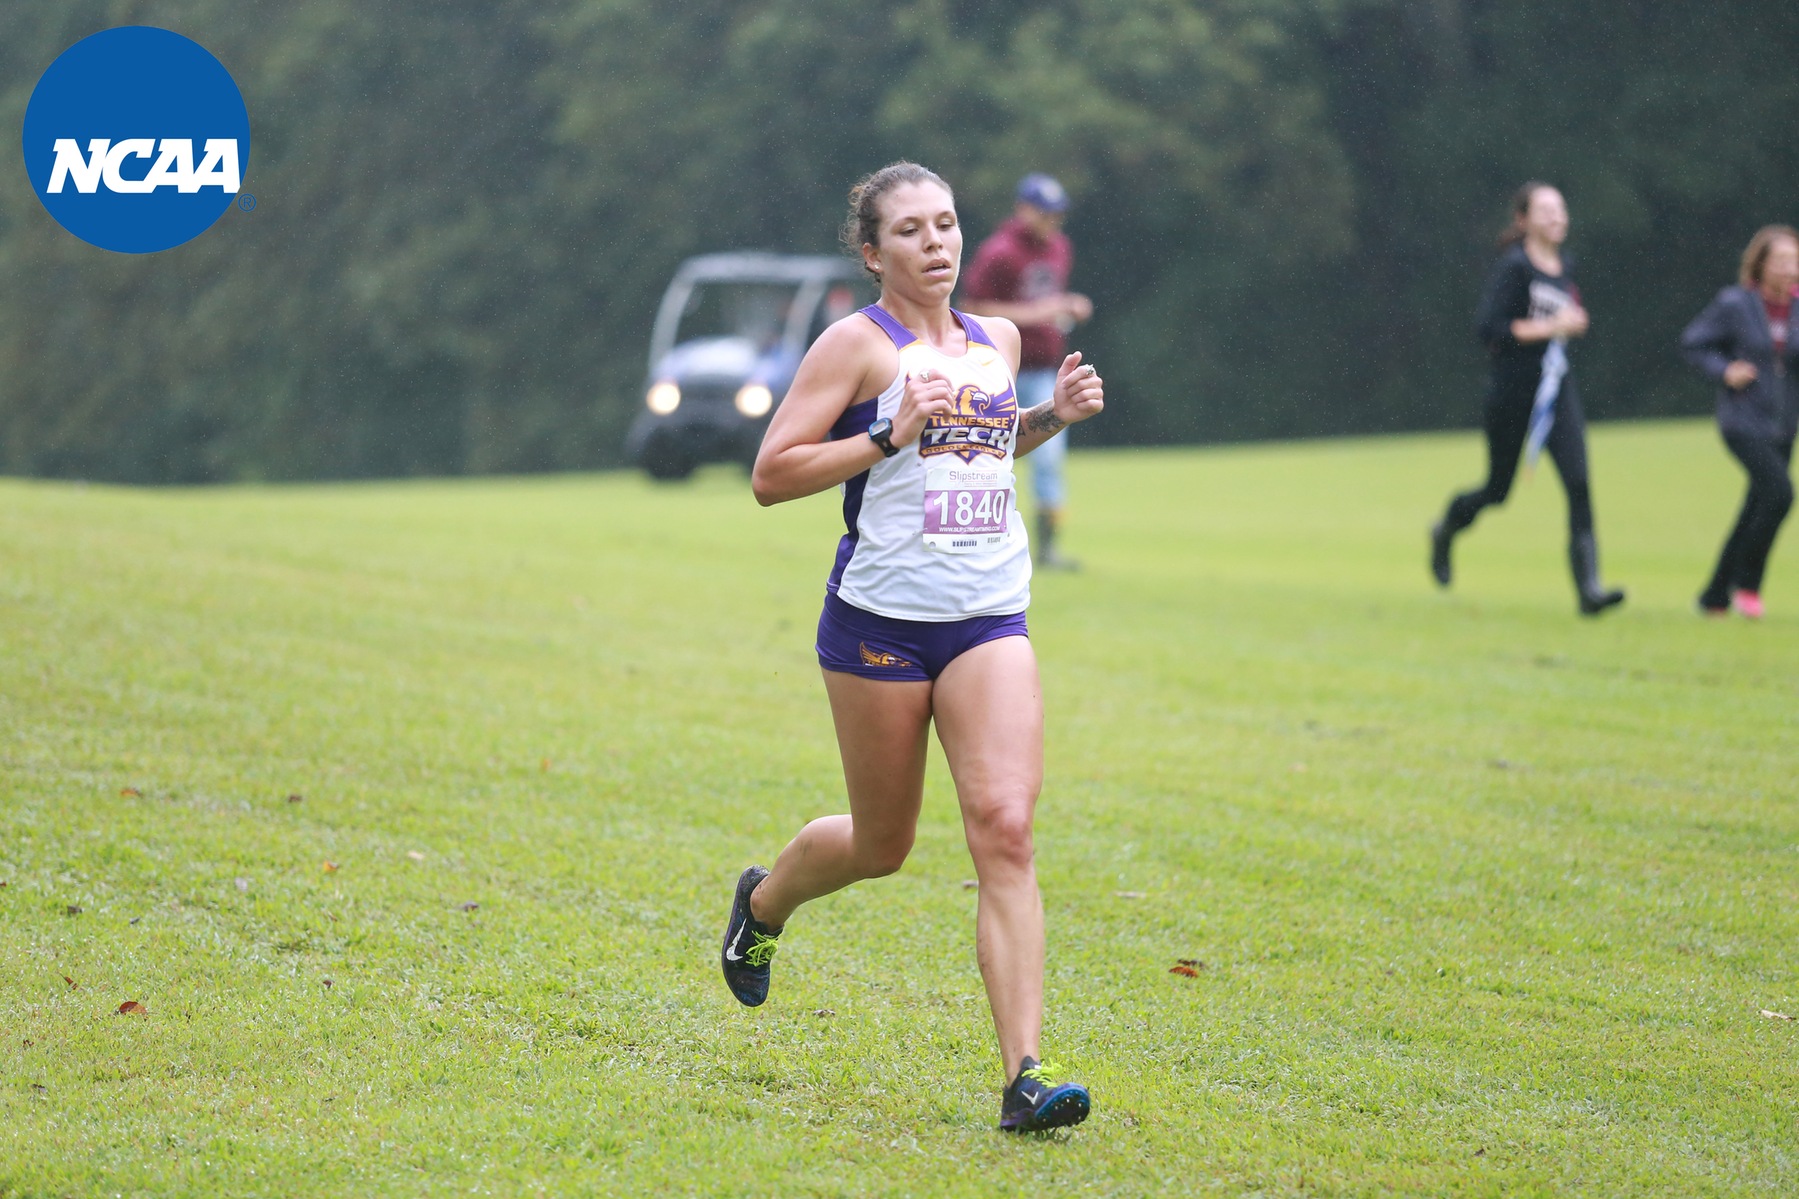 Tech women's cross country travels to NCAA South Regional on Friday